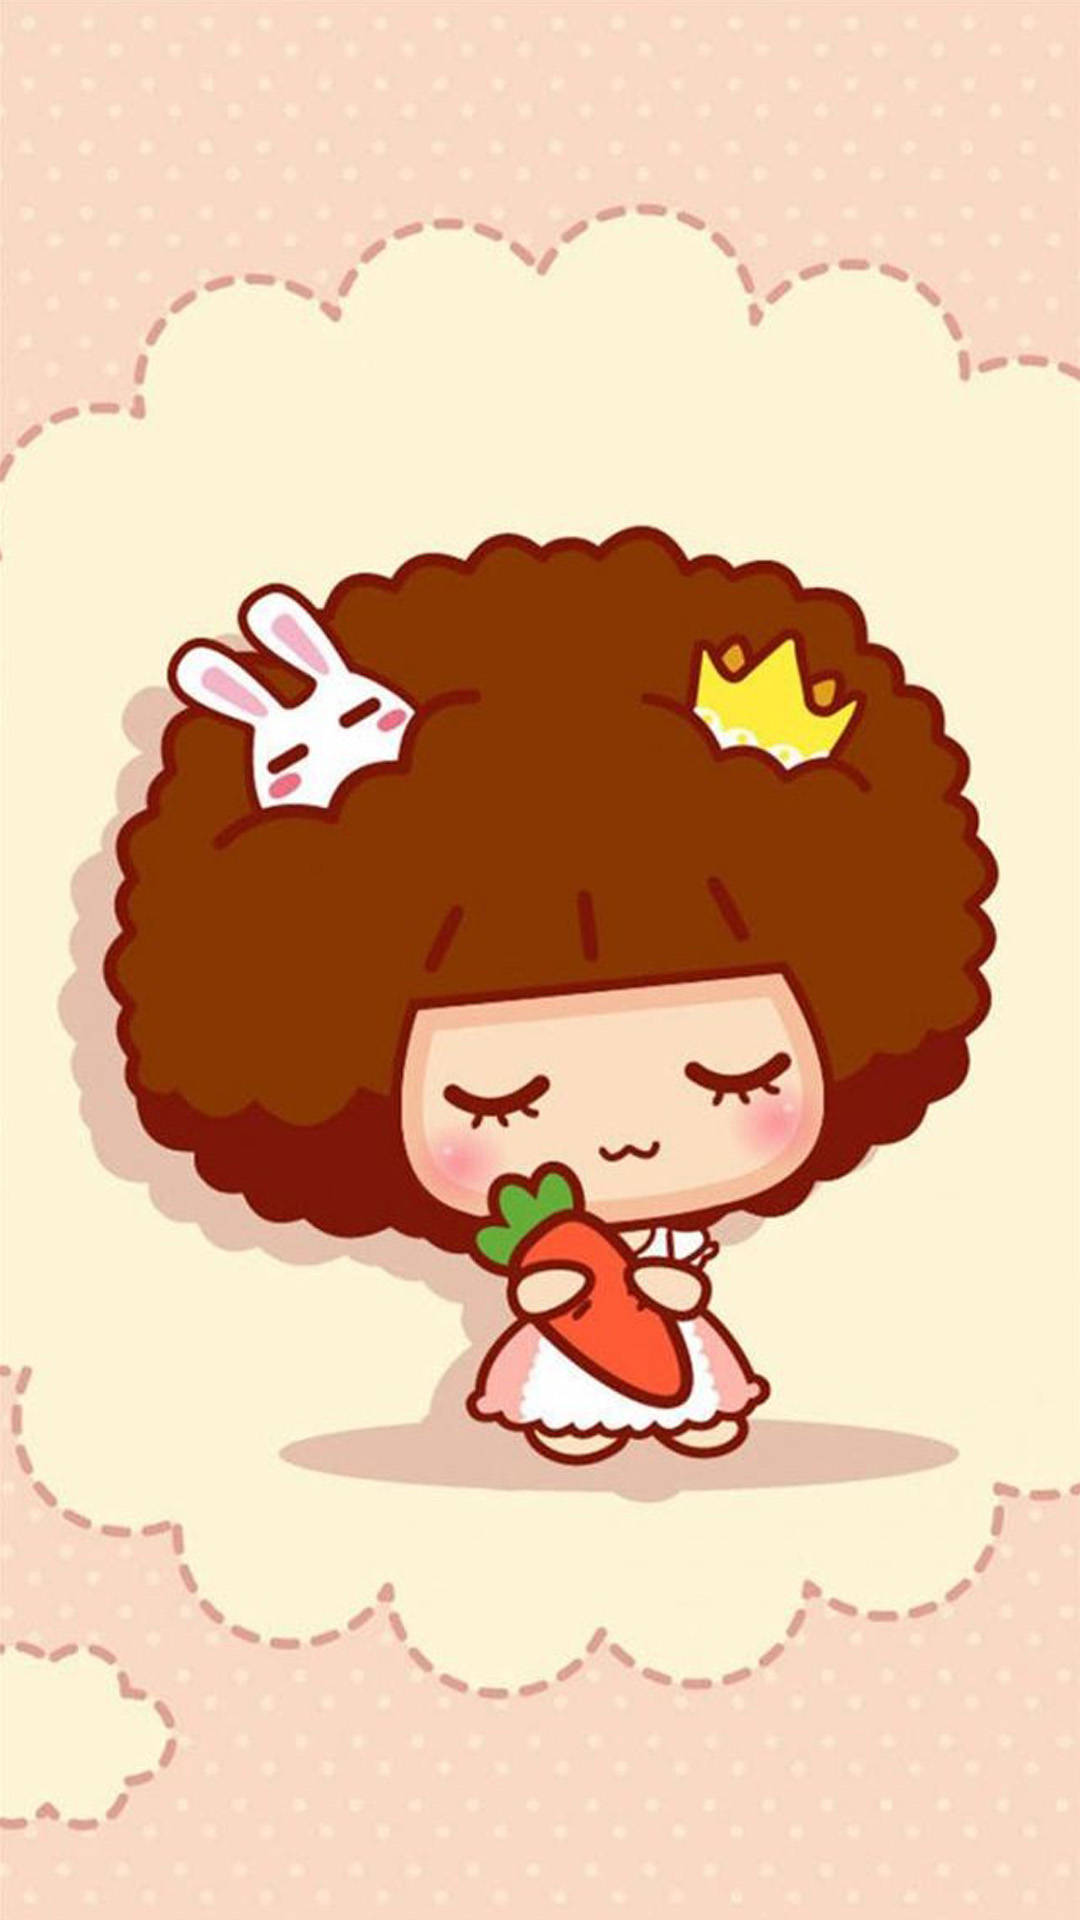 Girl With Curly Hair Cartoon IPhone Wallpaper